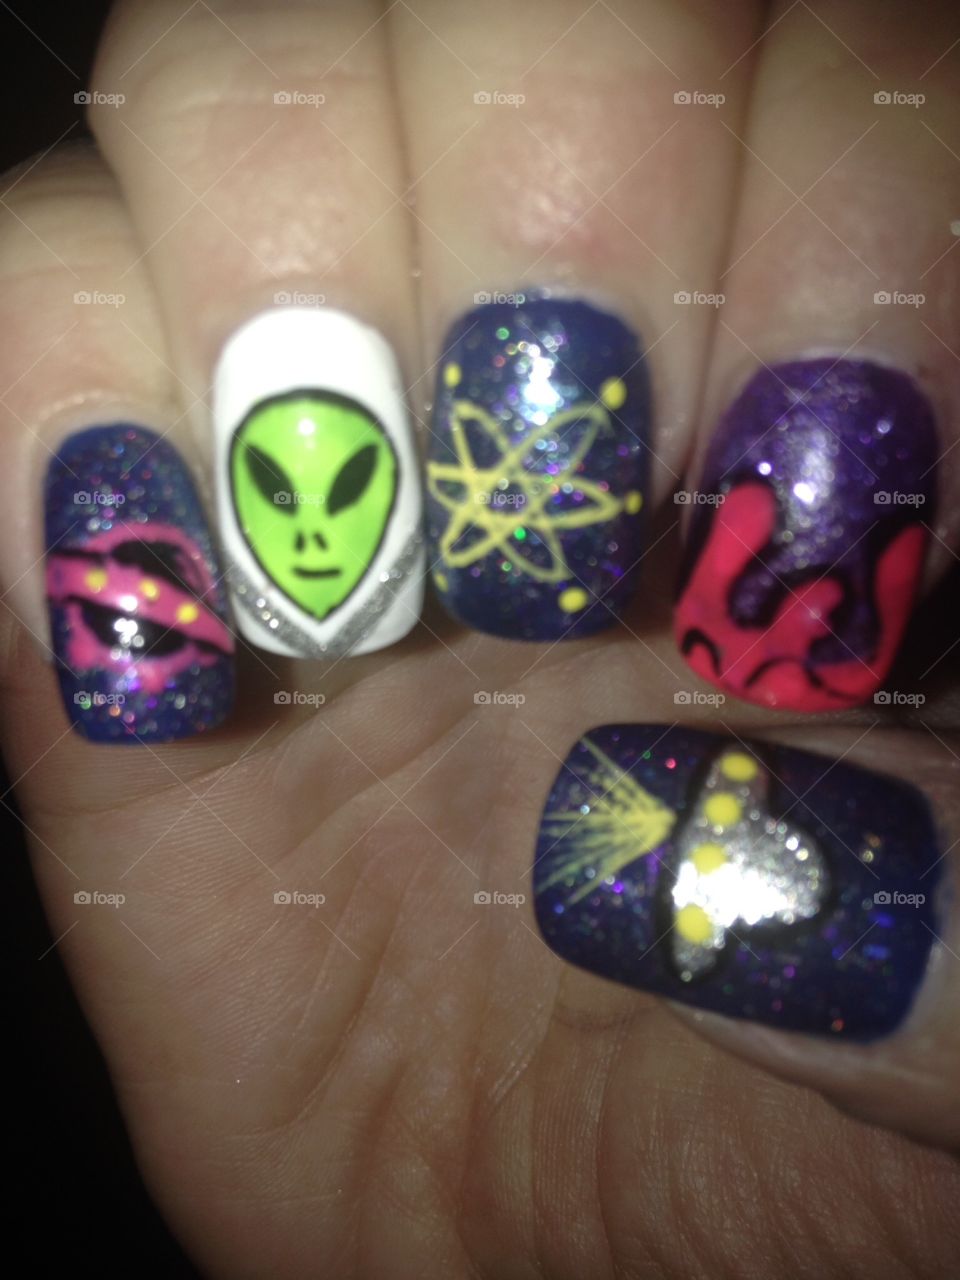 Science fiction and nail art